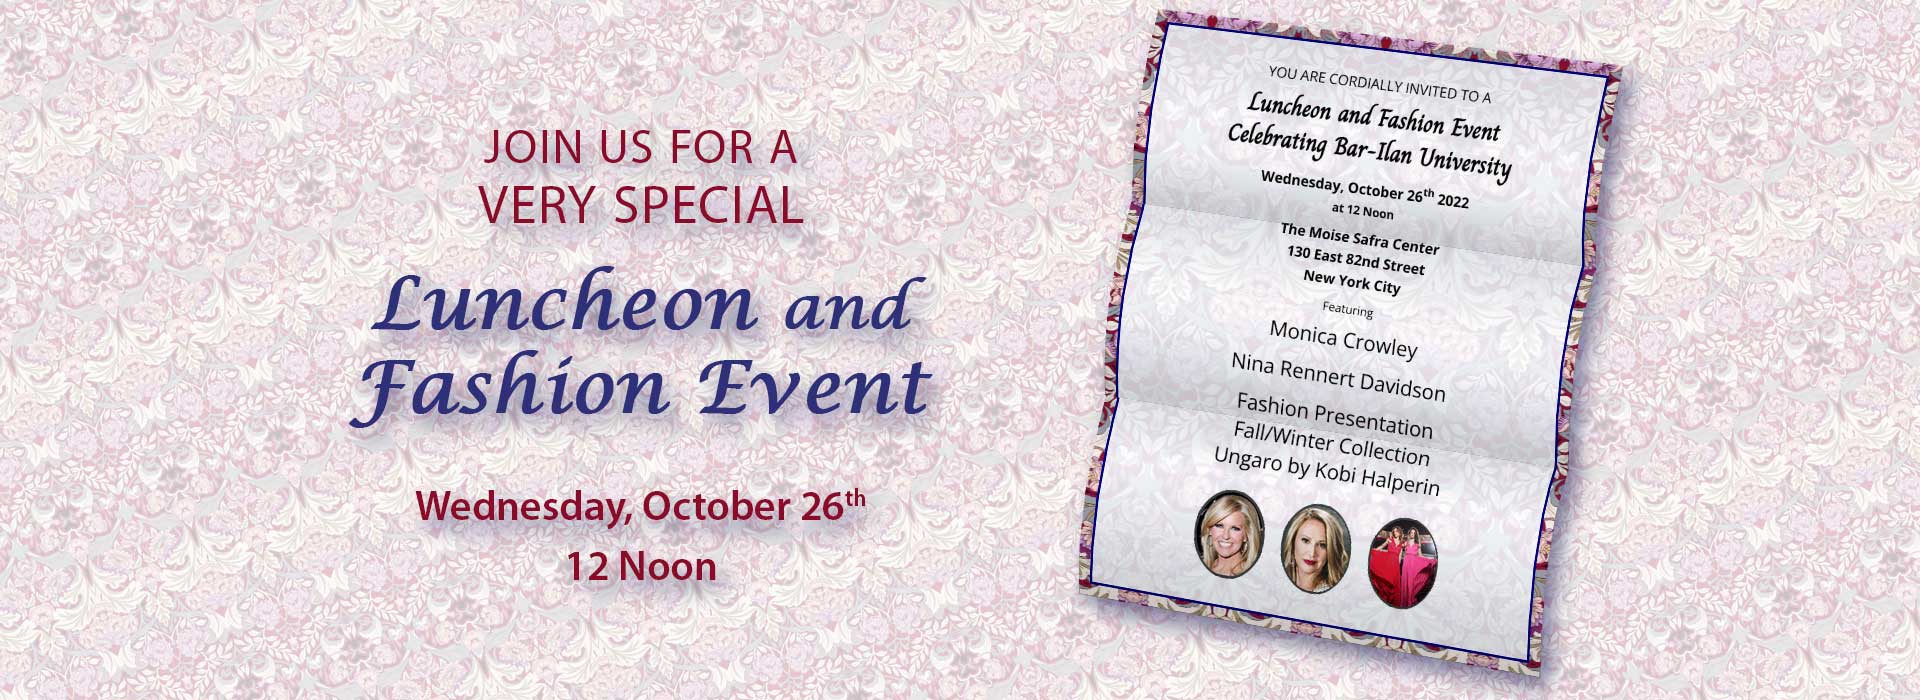 Join Us for a Luncheon and Fashion Event